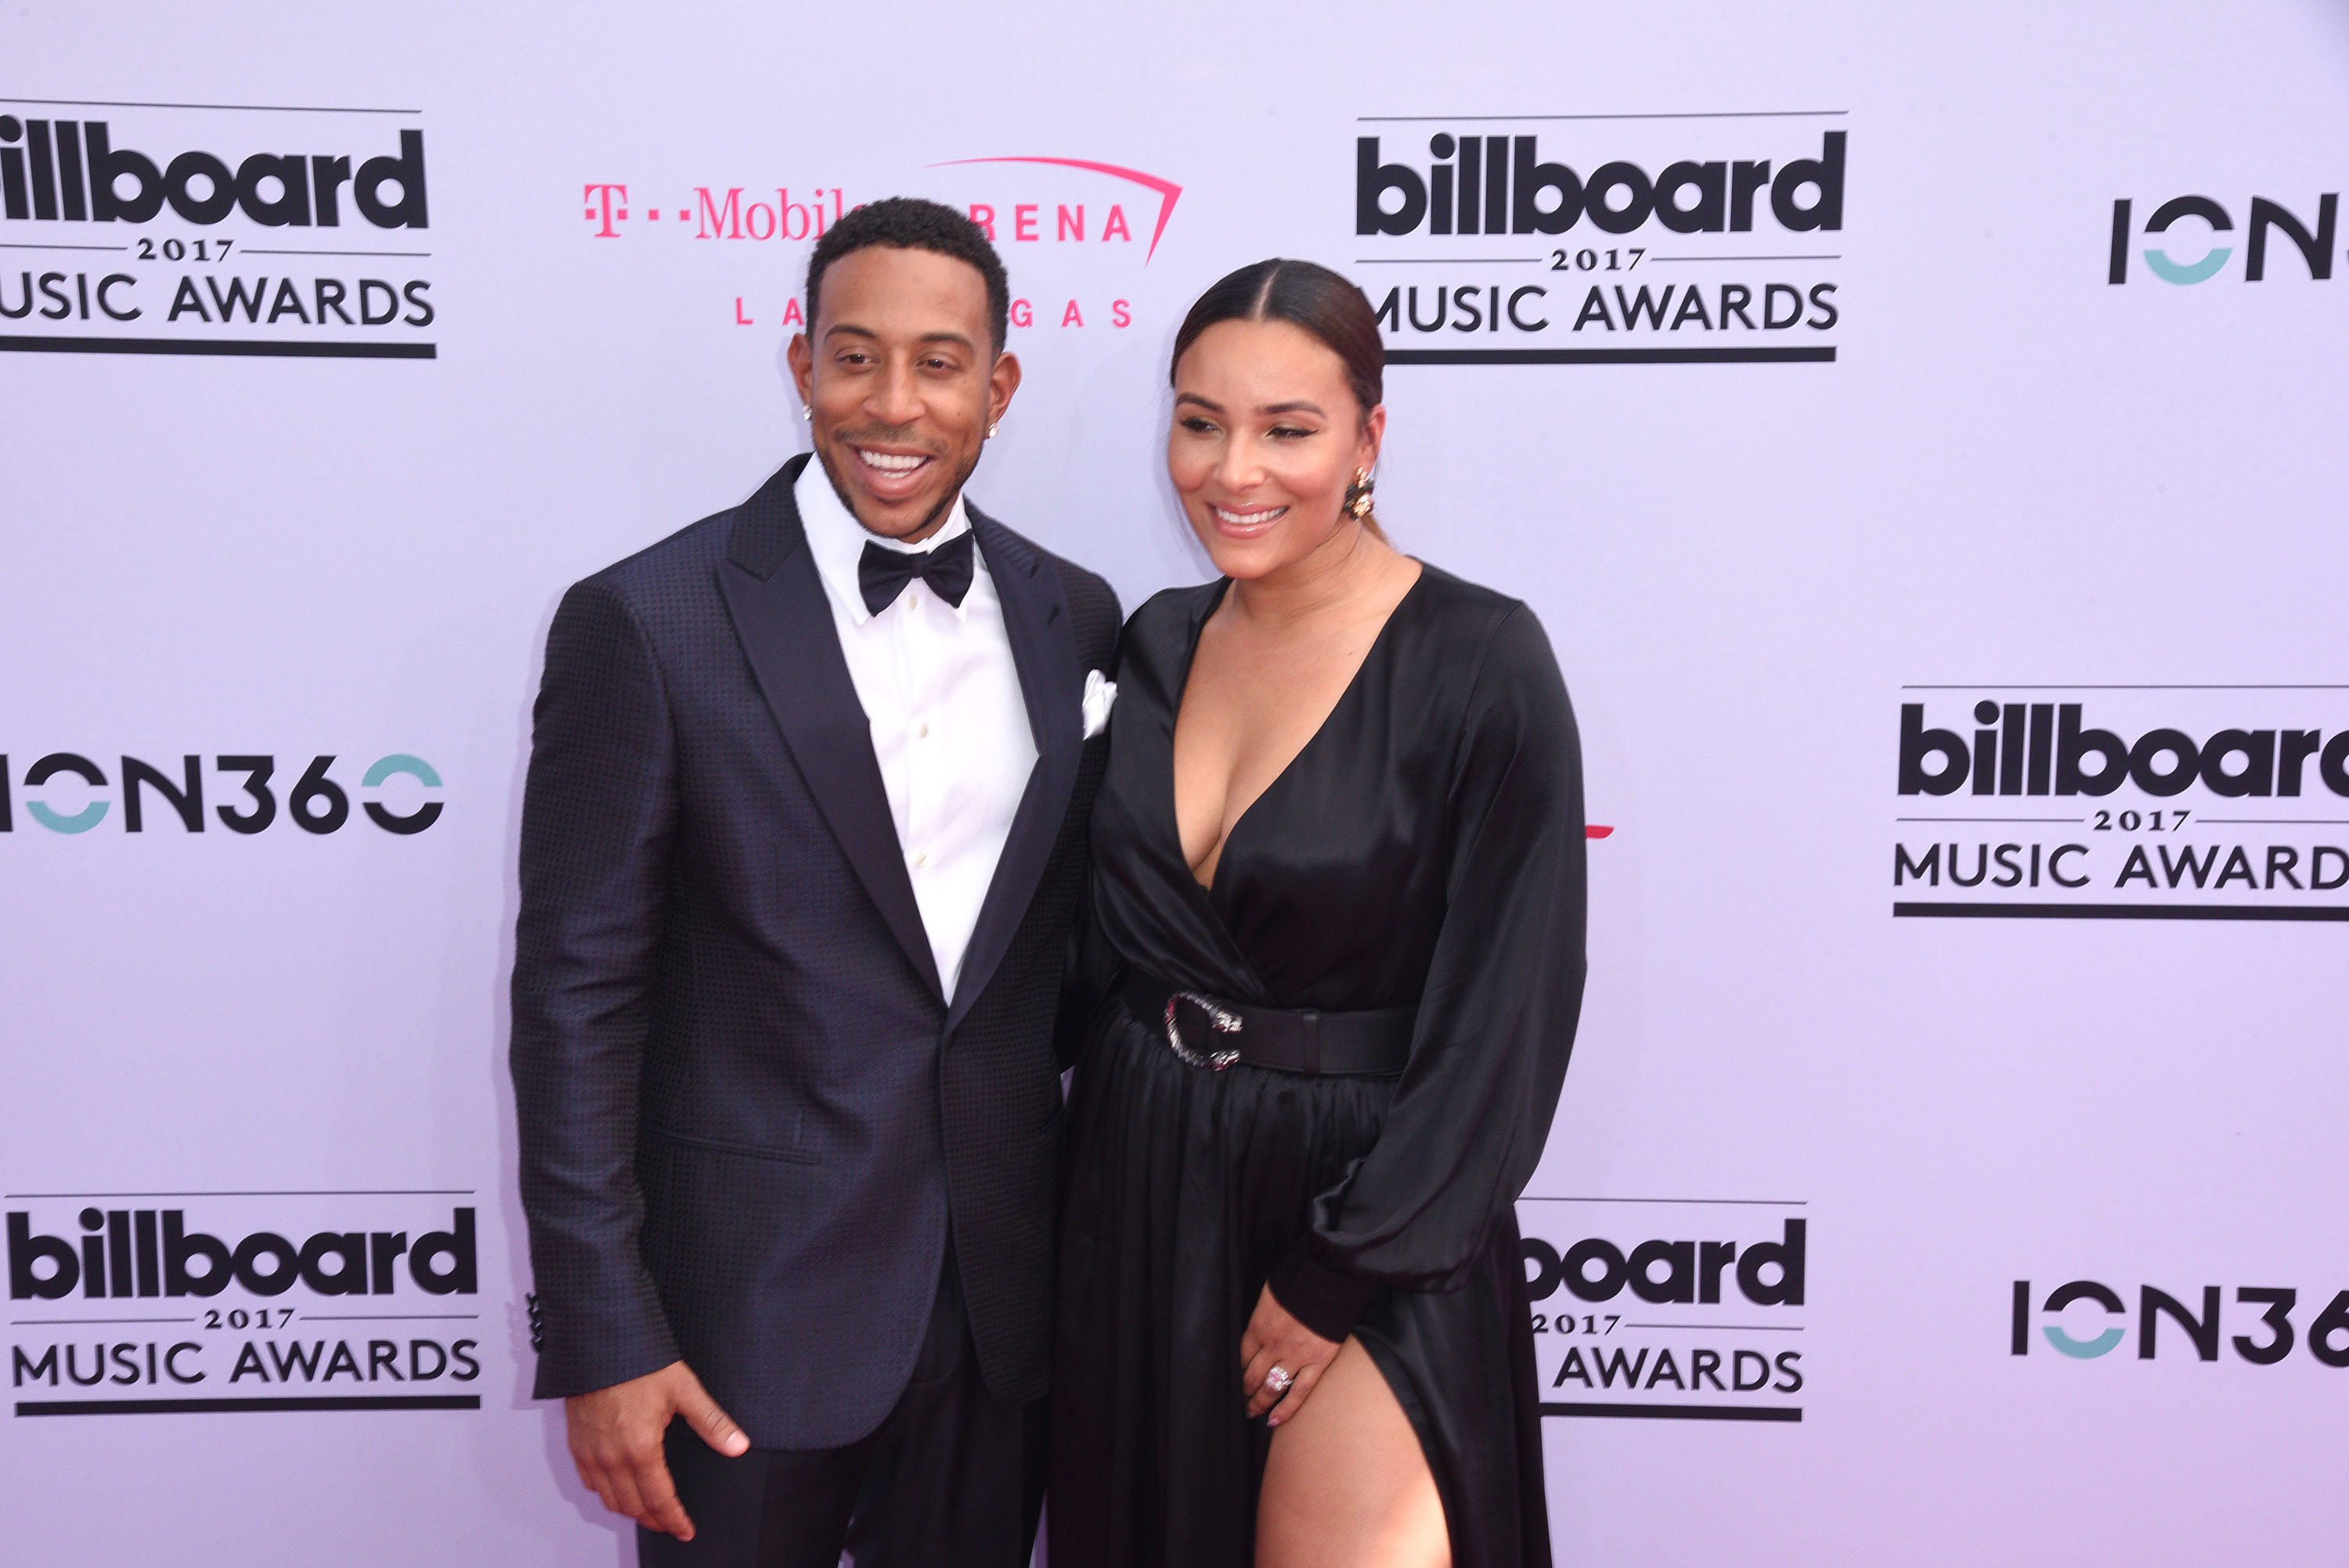 Ludacris and wife Eudoxie Mbouguiengue at the 2017 Billboard Music Awards in Las Vegas | Source: Getty Images